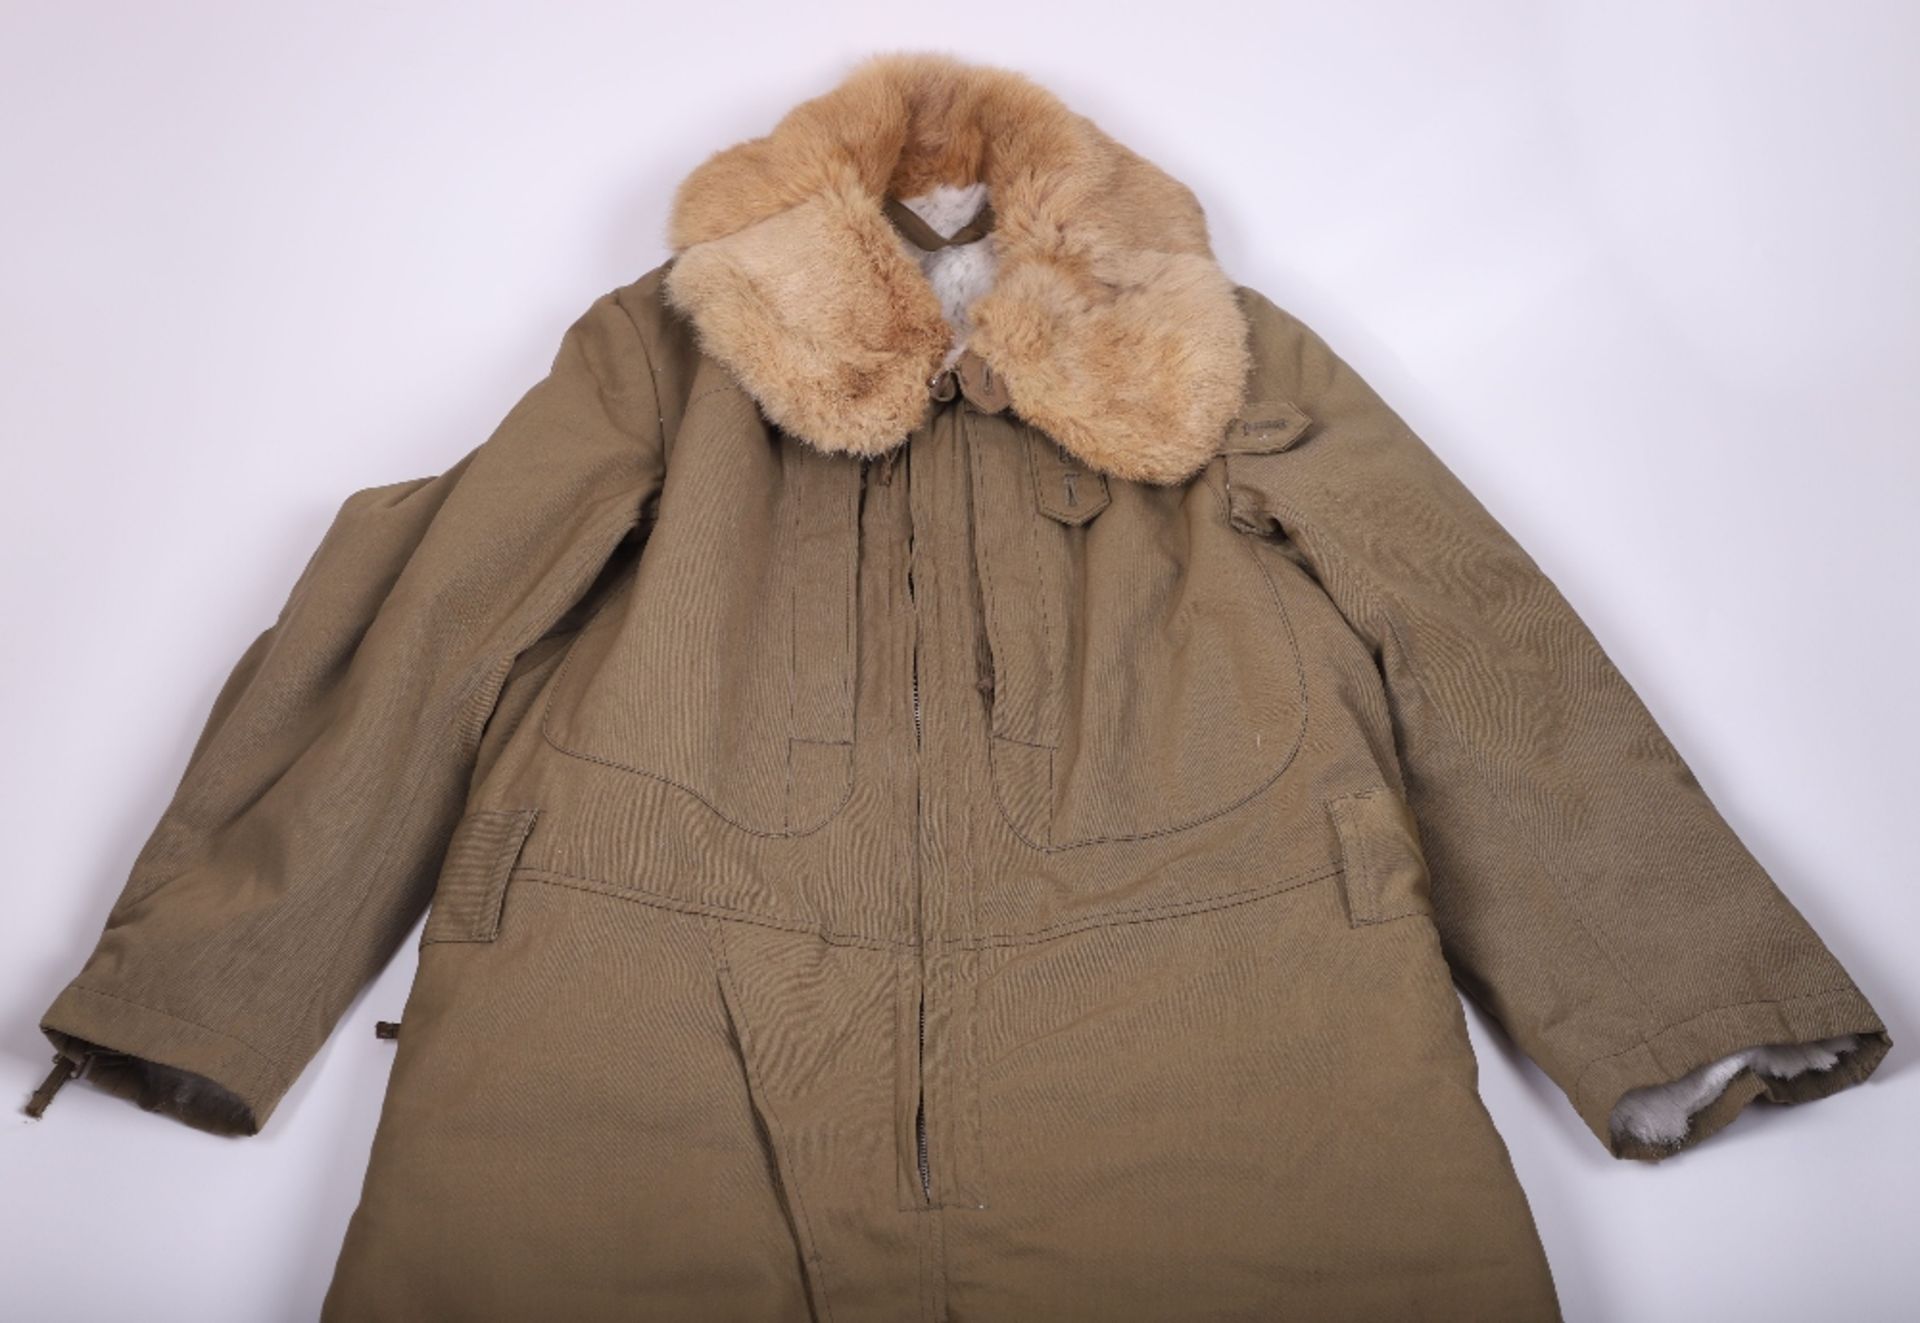 WW2 Imperial Japanese Airforce Flight Suit - Image 3 of 11